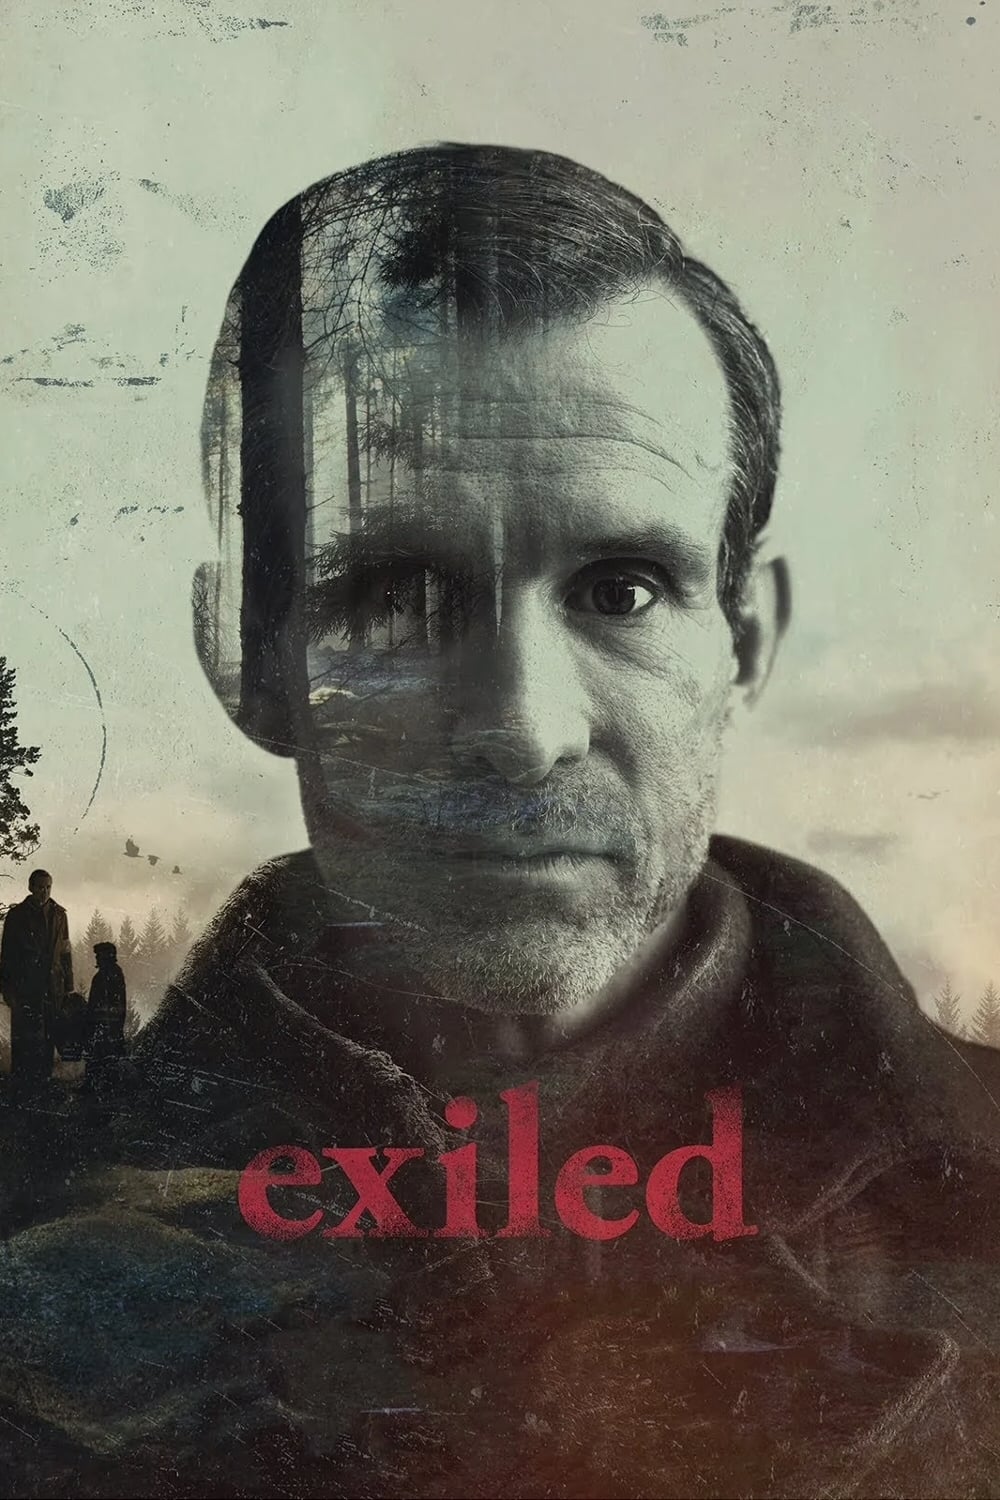 Exiled